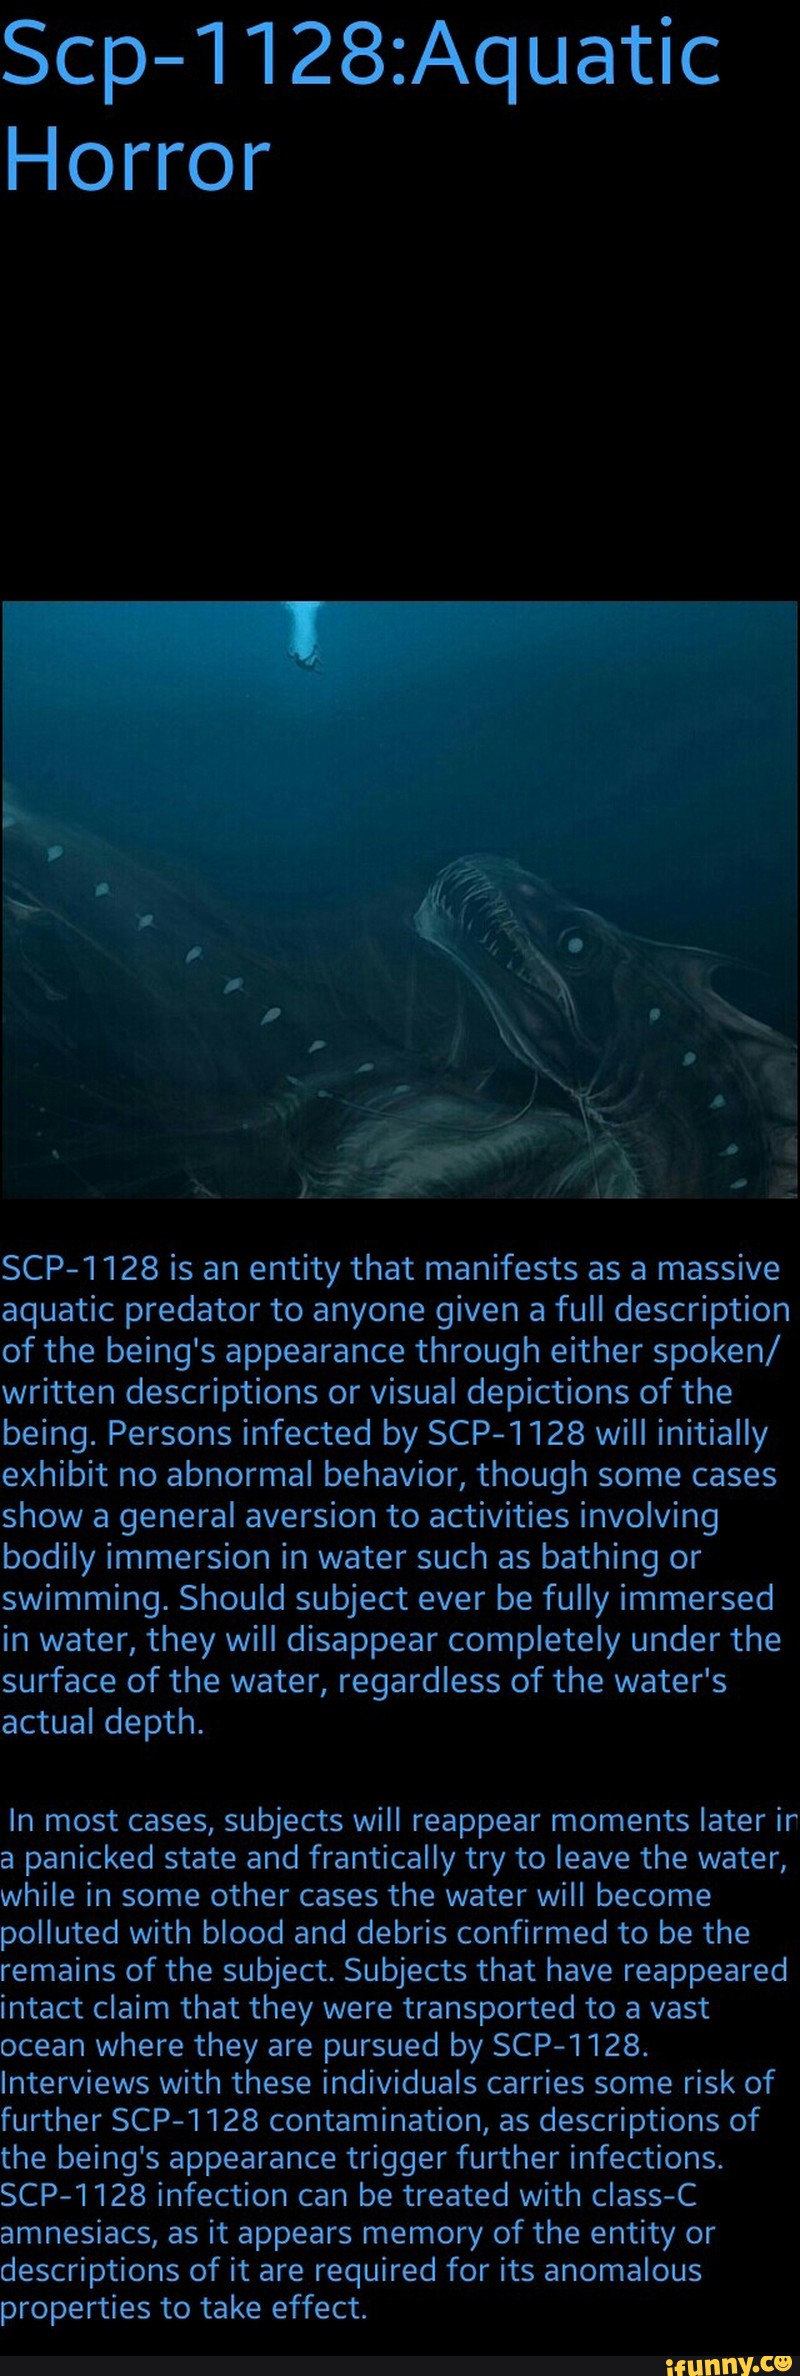 Scp 112aquatic Scp 1128 Is An Entity That Manifests As A Massive Aquatic Predator To Anyone Given A Full Description Spoken Written Descriptions Or Visual Depictions Of The Being Persons Infected By Scp 1128 Will